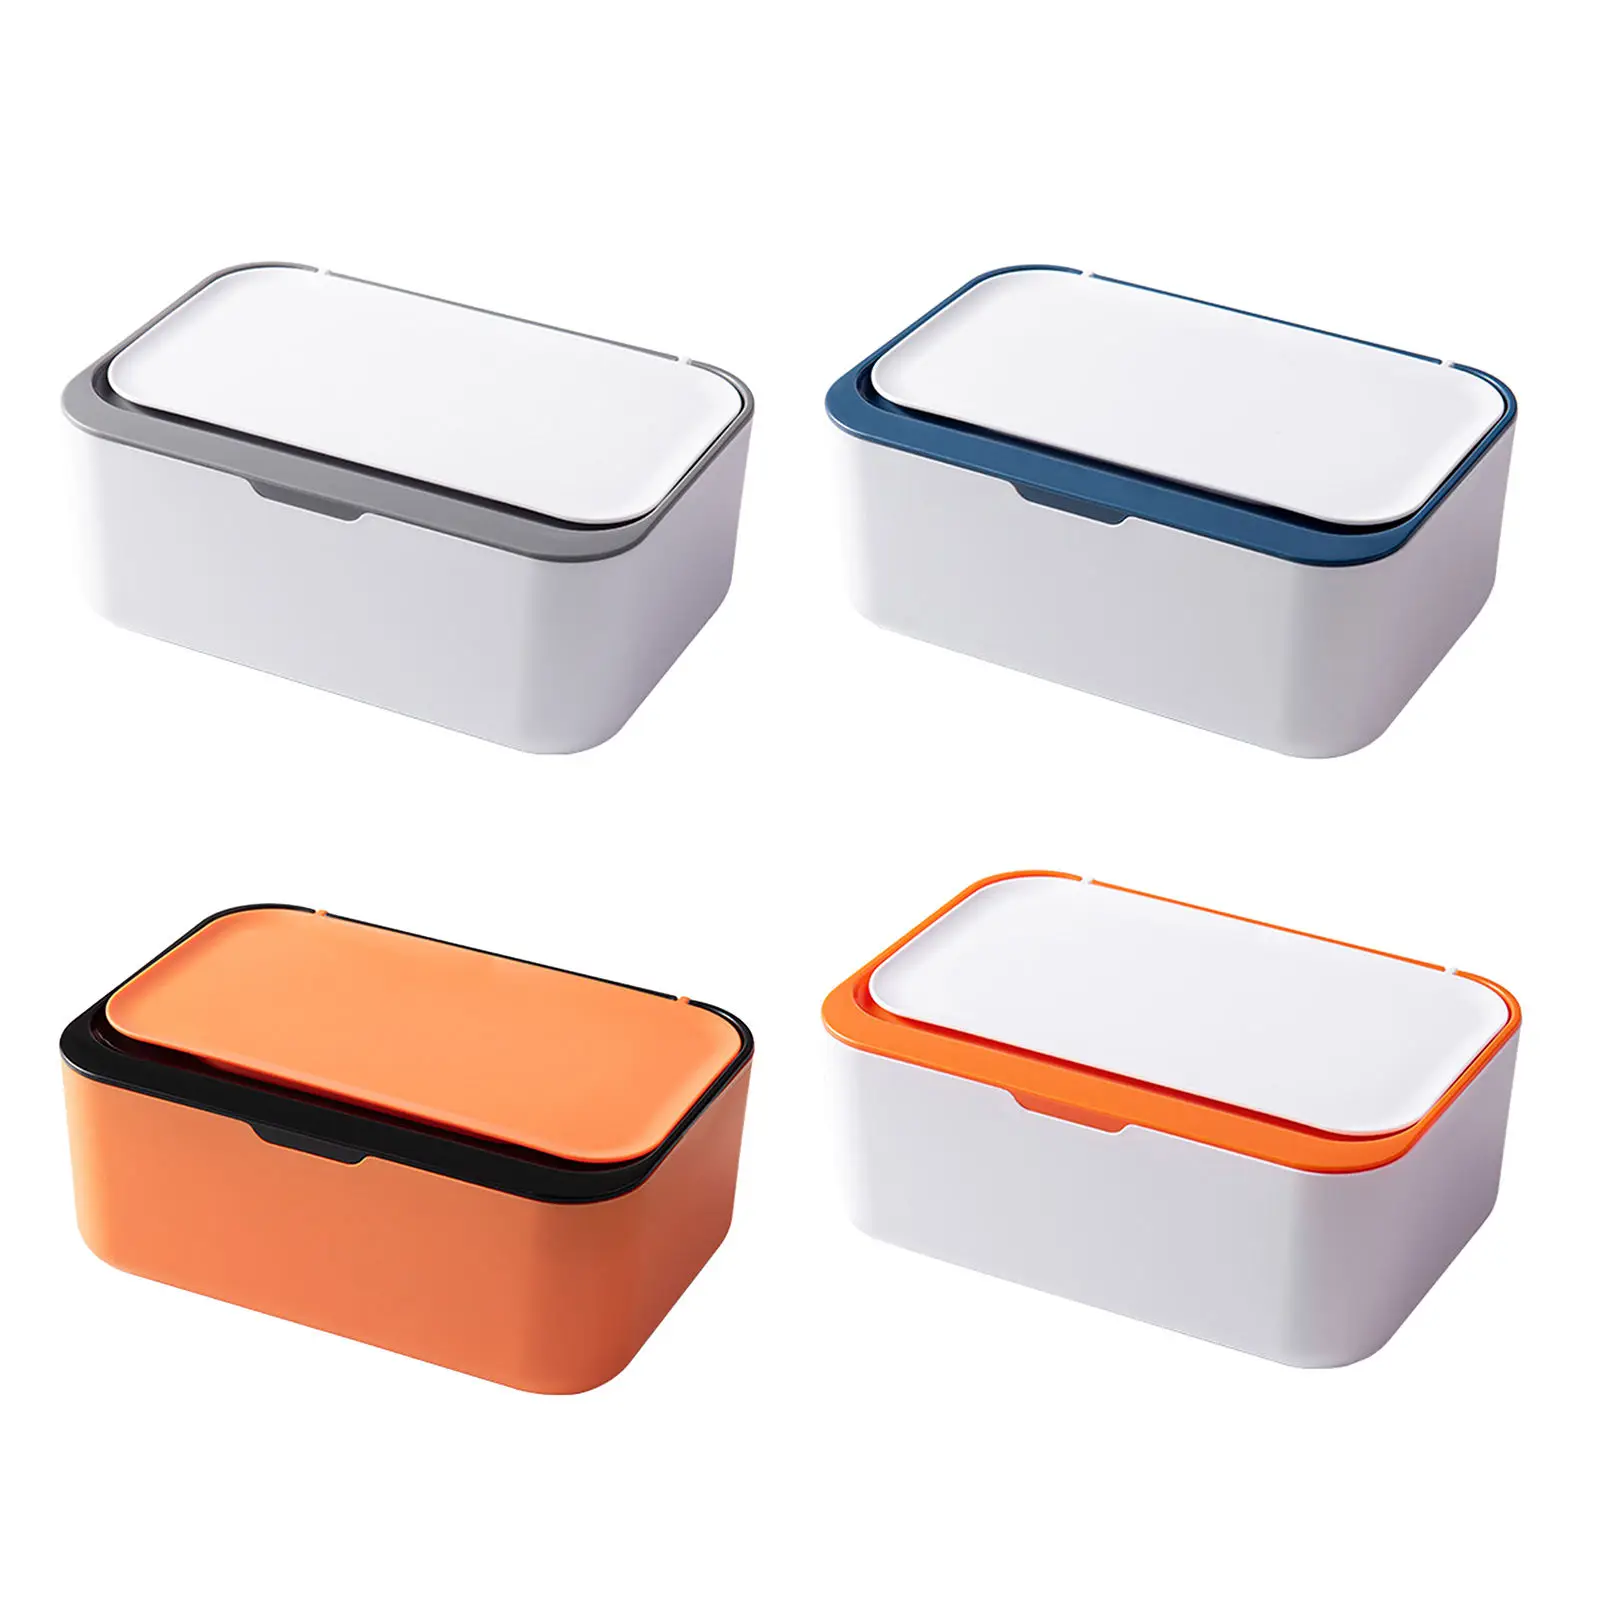 Tissue Box with Lid Large Capacity Removable Tissue Face Cover Storage Holder Napkin Organizer Seal Dustproof for Home Office